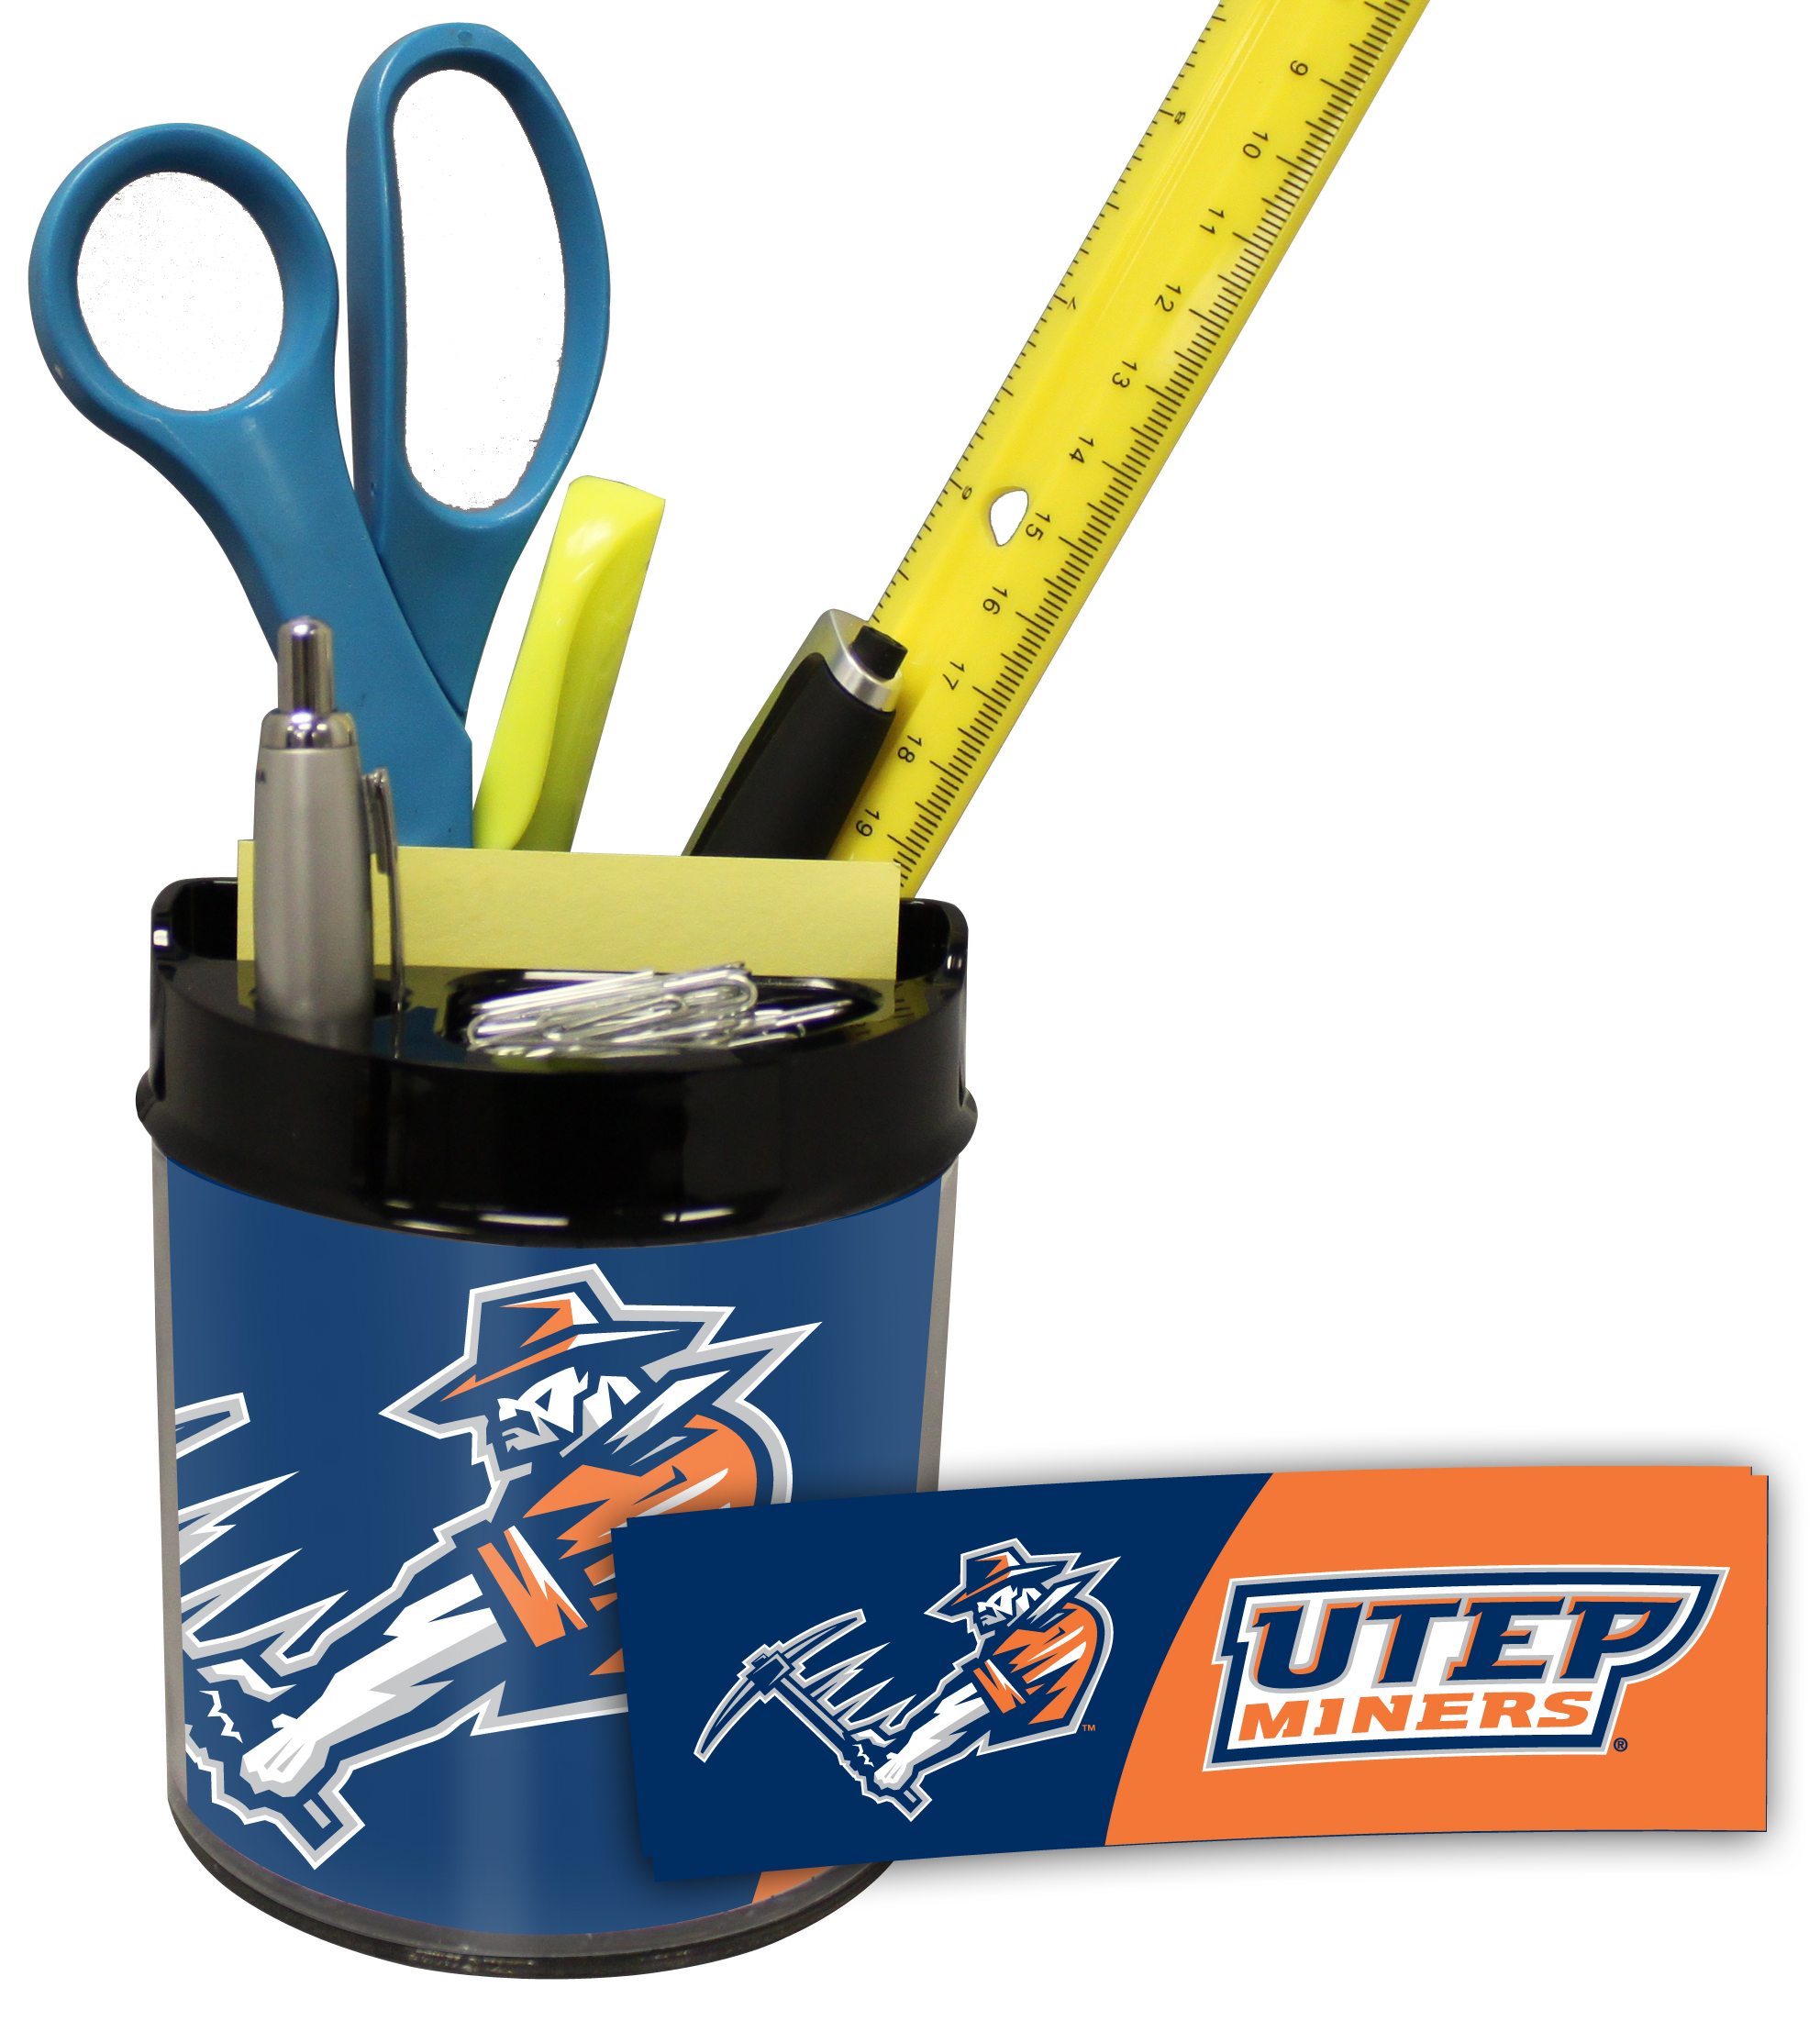 UTEP Miners Small Desk Caddy